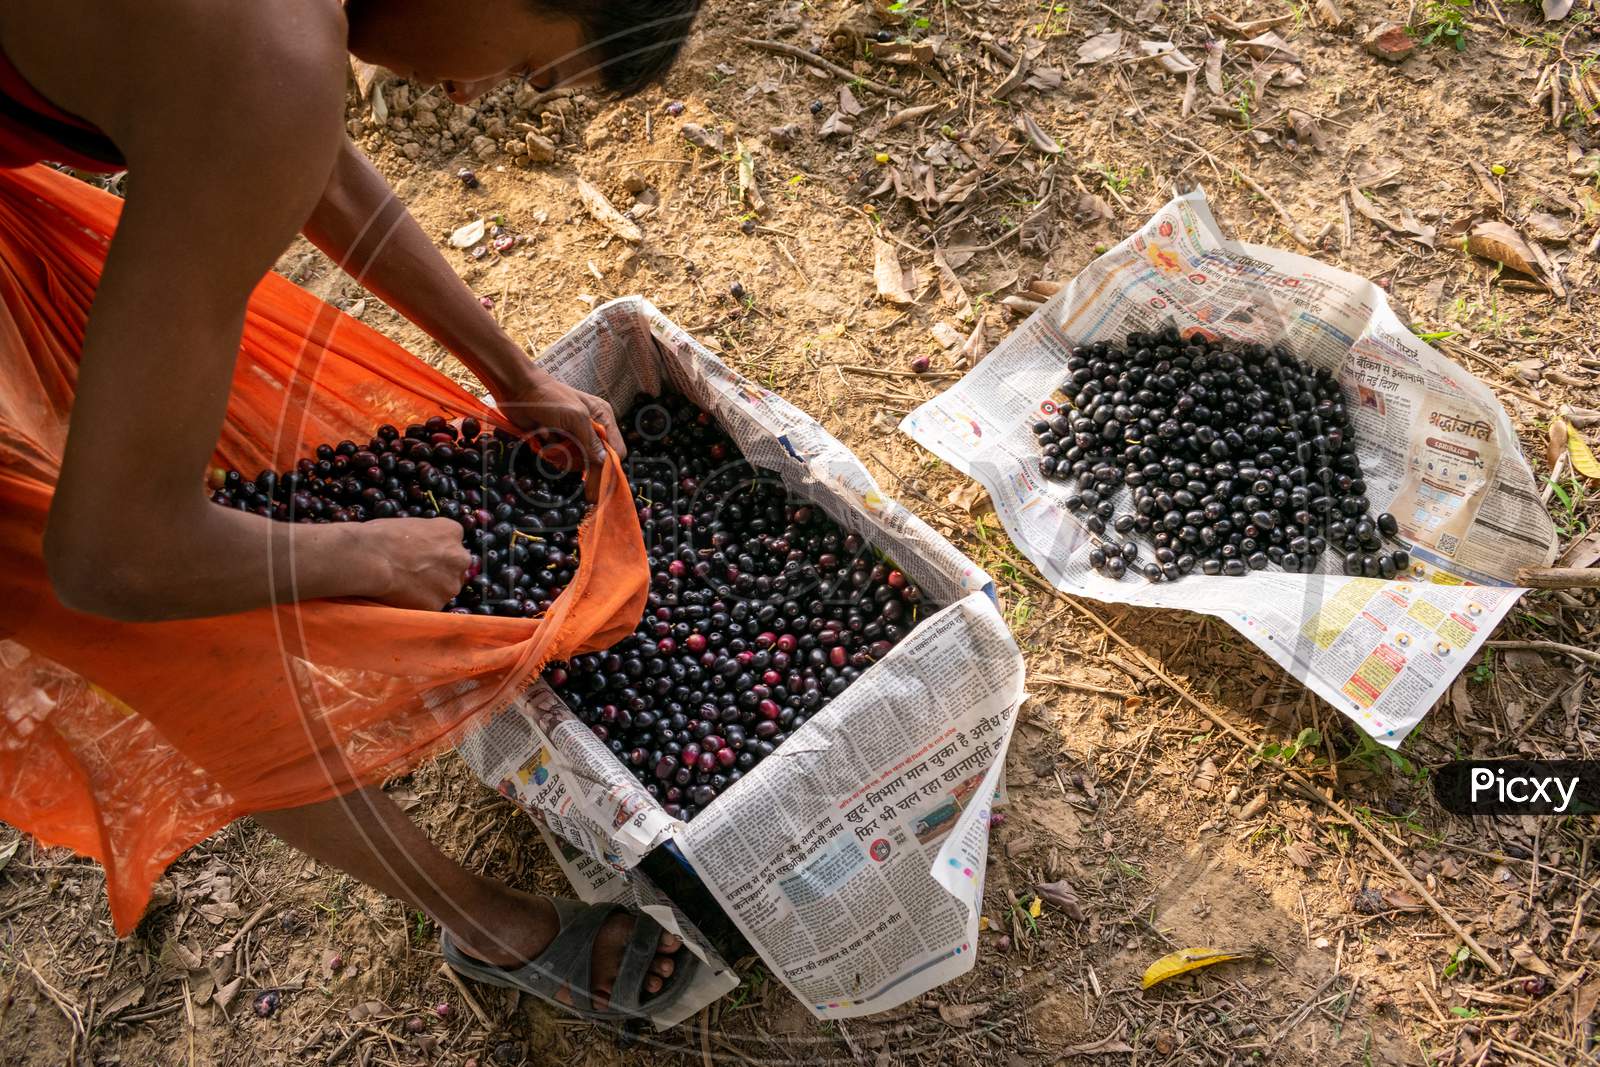 A boy collects fresh Jamun, Indian blueberry or black plum fruits in a crate after picking from the trees